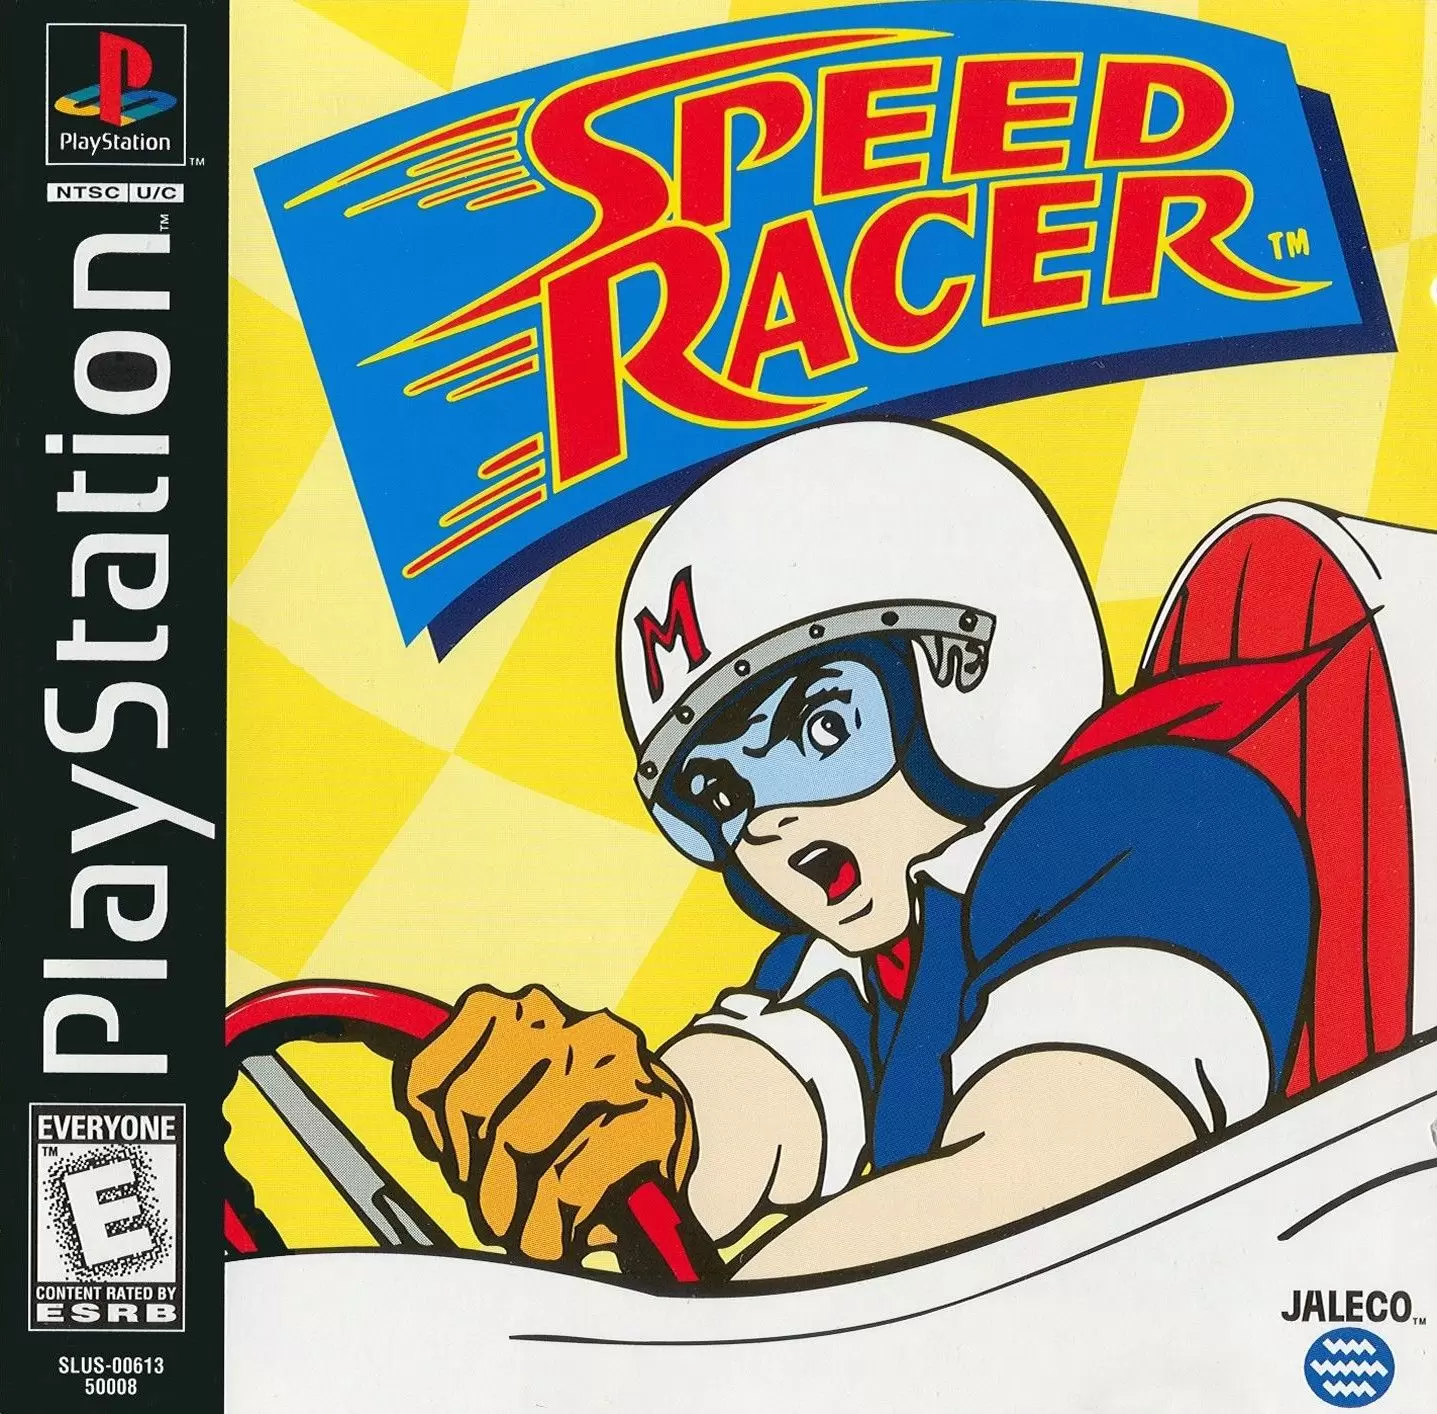 Playstation games - Speed Racer